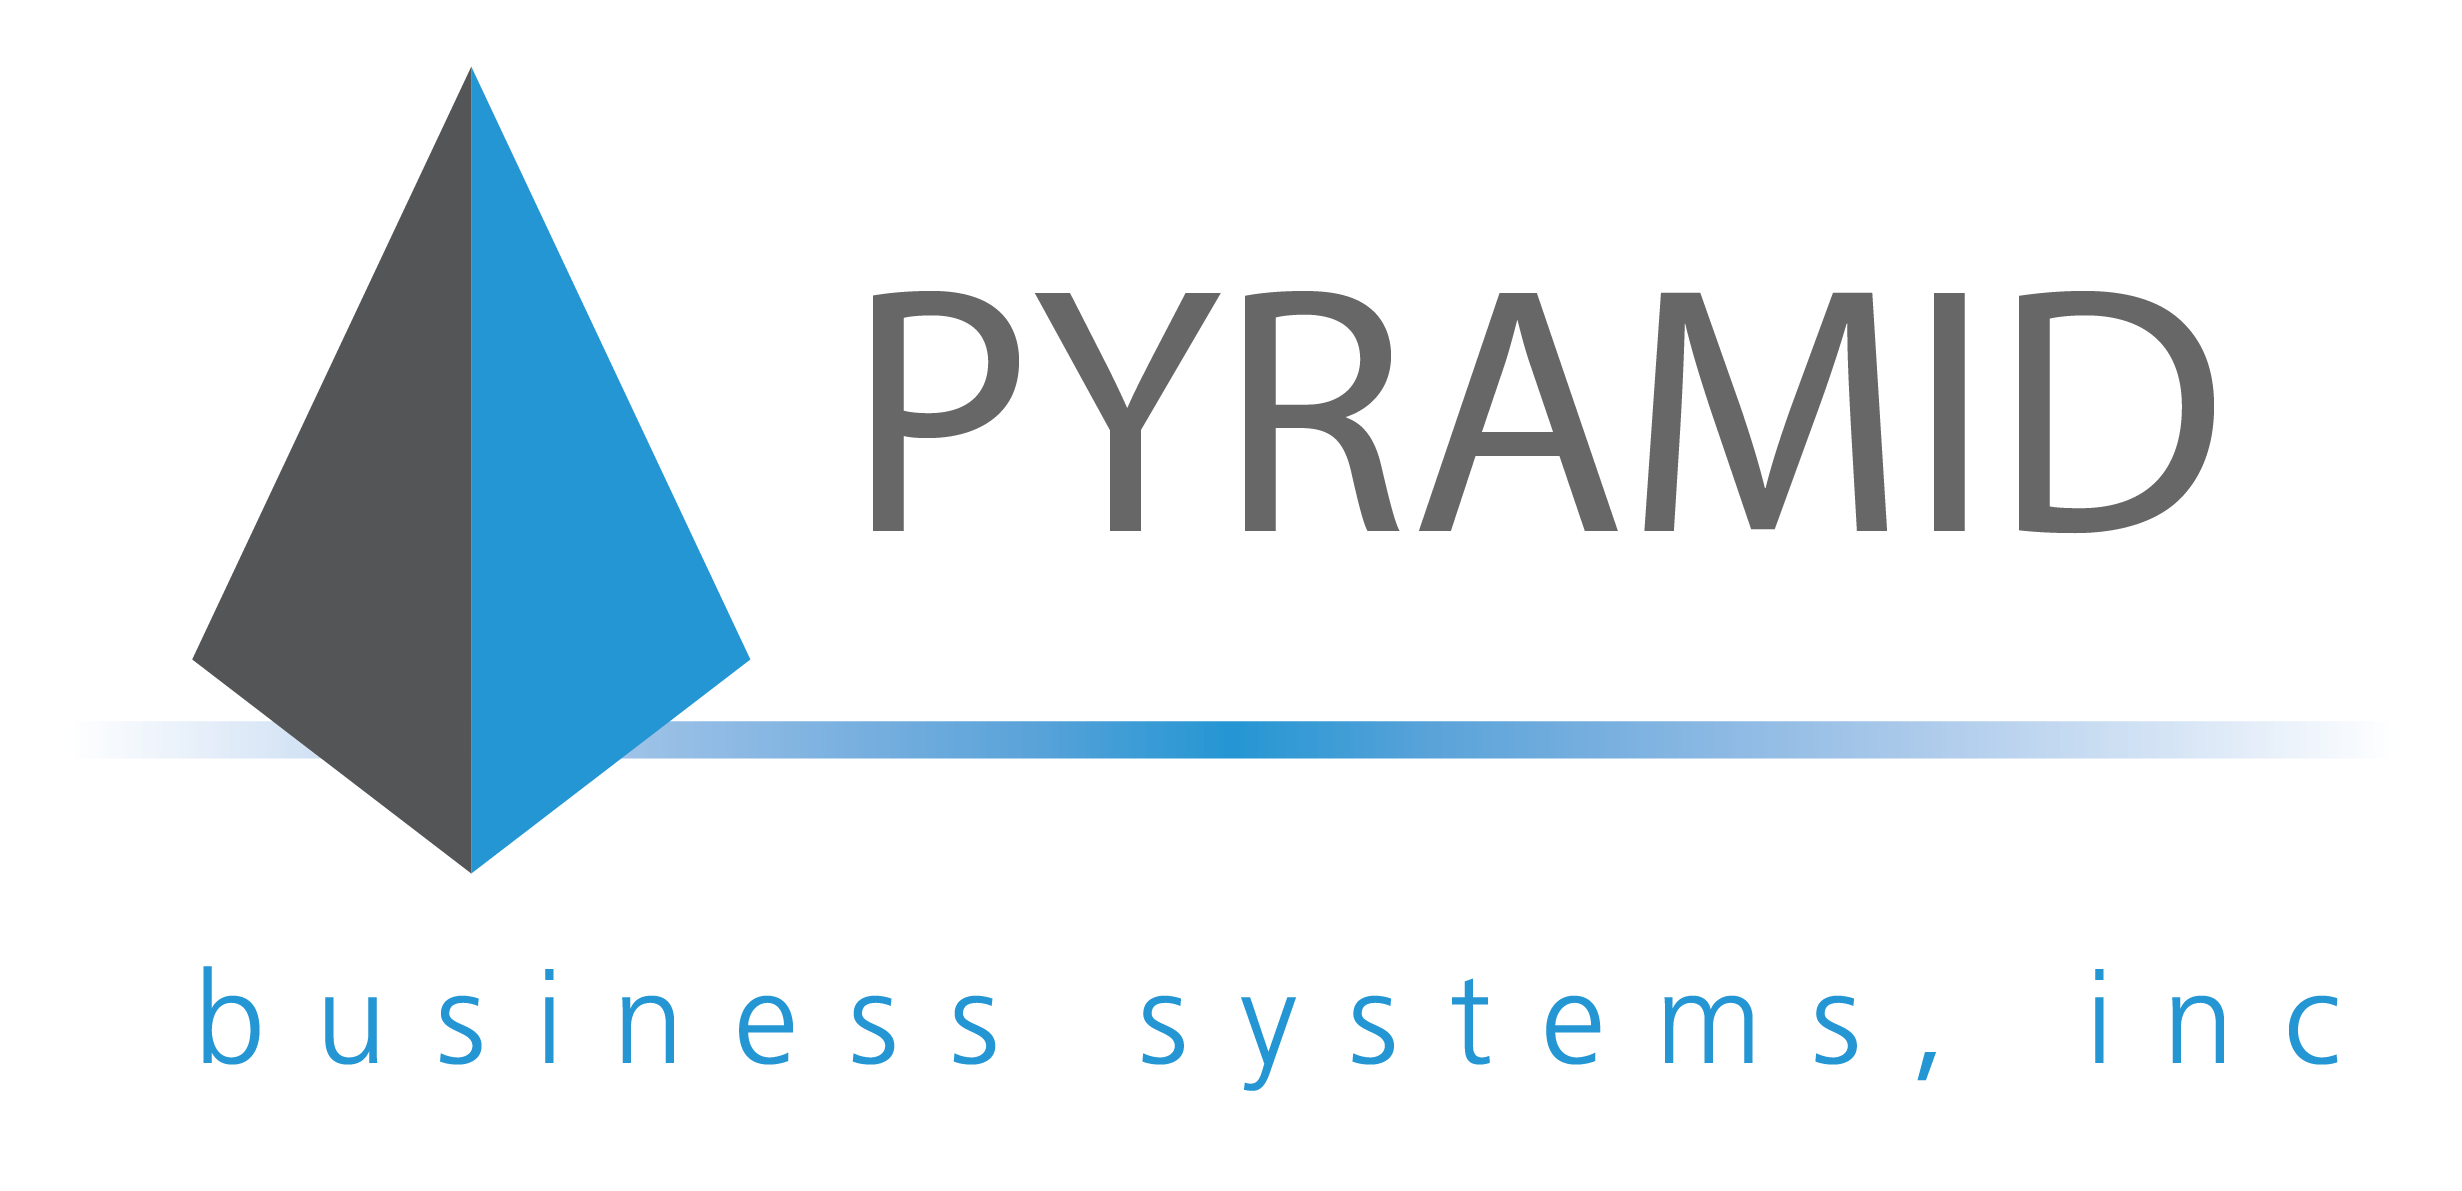 PYRAMID Business Systems